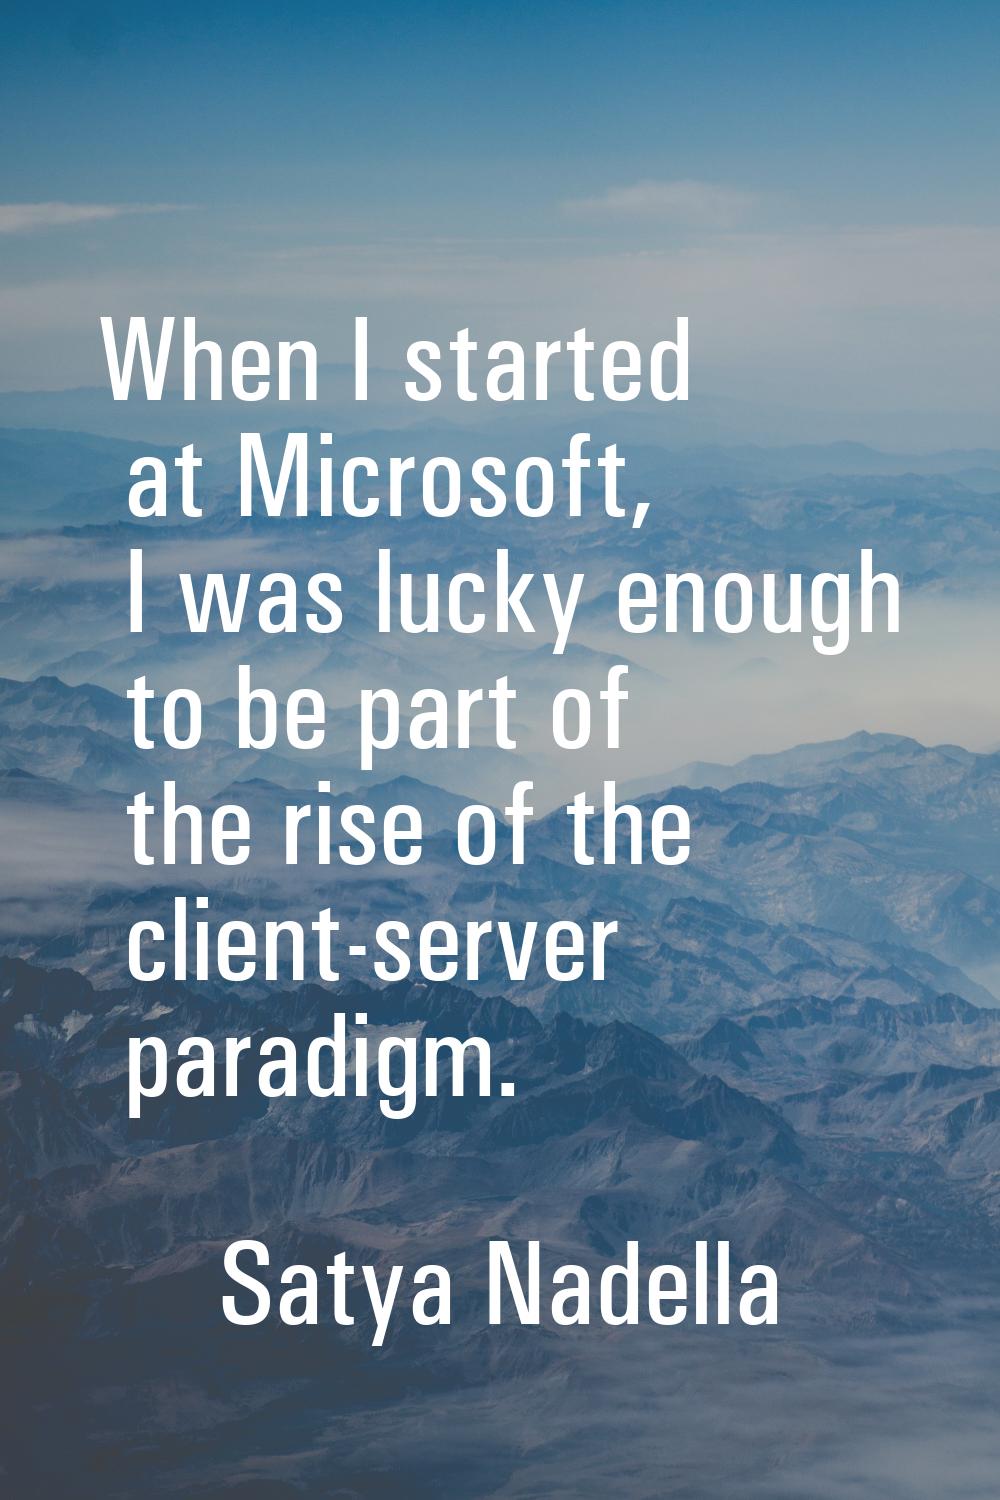 When I started at Microsoft, I was lucky enough to be part of the rise of the client-server paradig